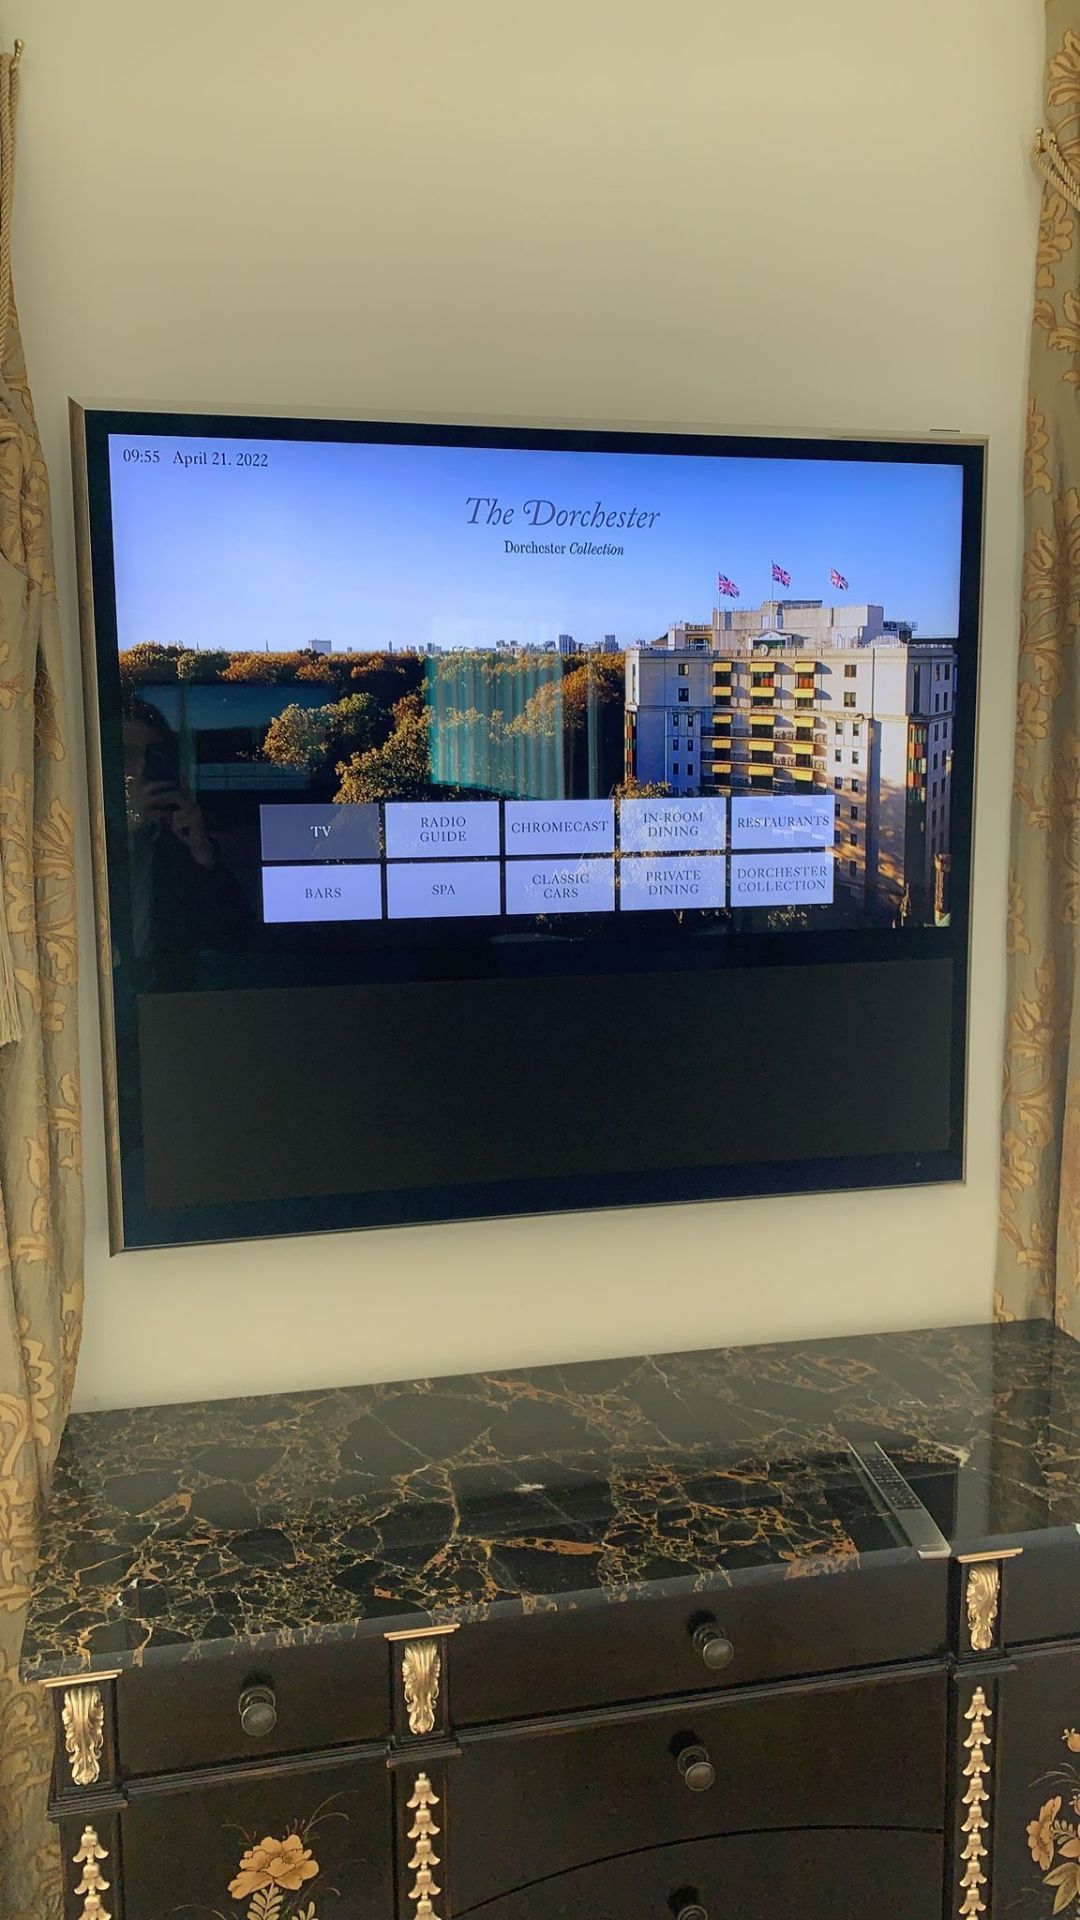 Bang Olufsen BeoVision 10-40" Hotel LCD TV Diagonal picture size: 40 inches (101.6cm) Aspect ratio: